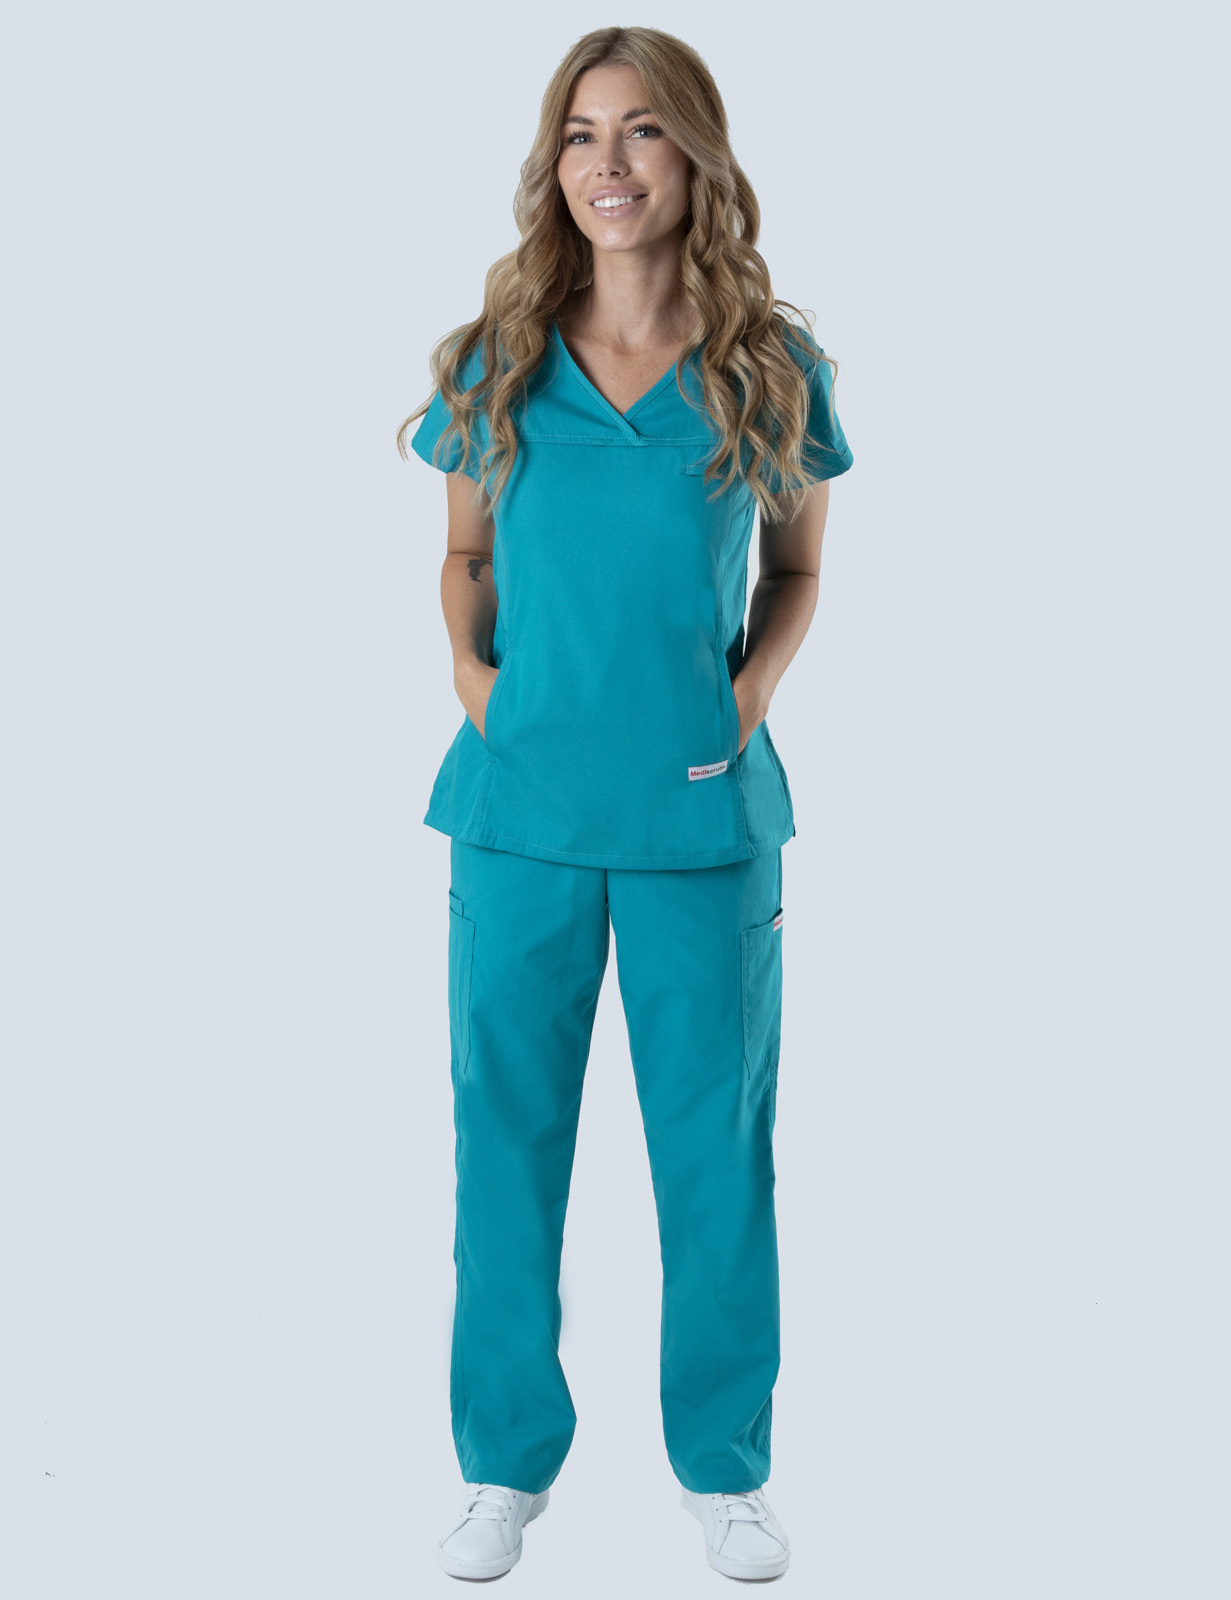 Women's Cargo Performance Pants - Teal - X Small